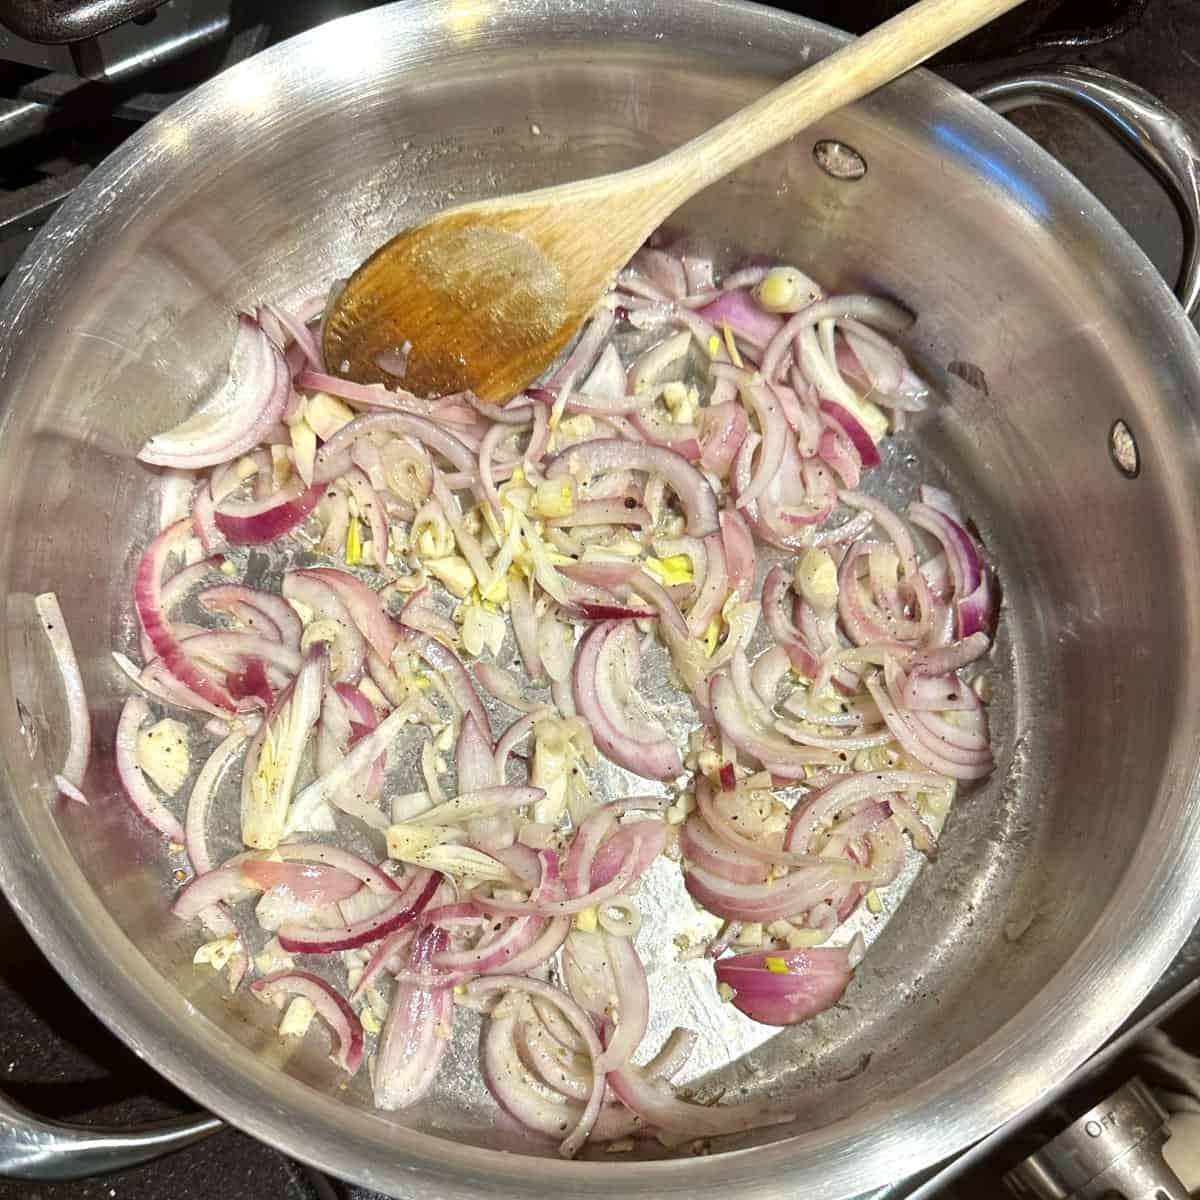 Onions and garlic sauteing in olive oil.